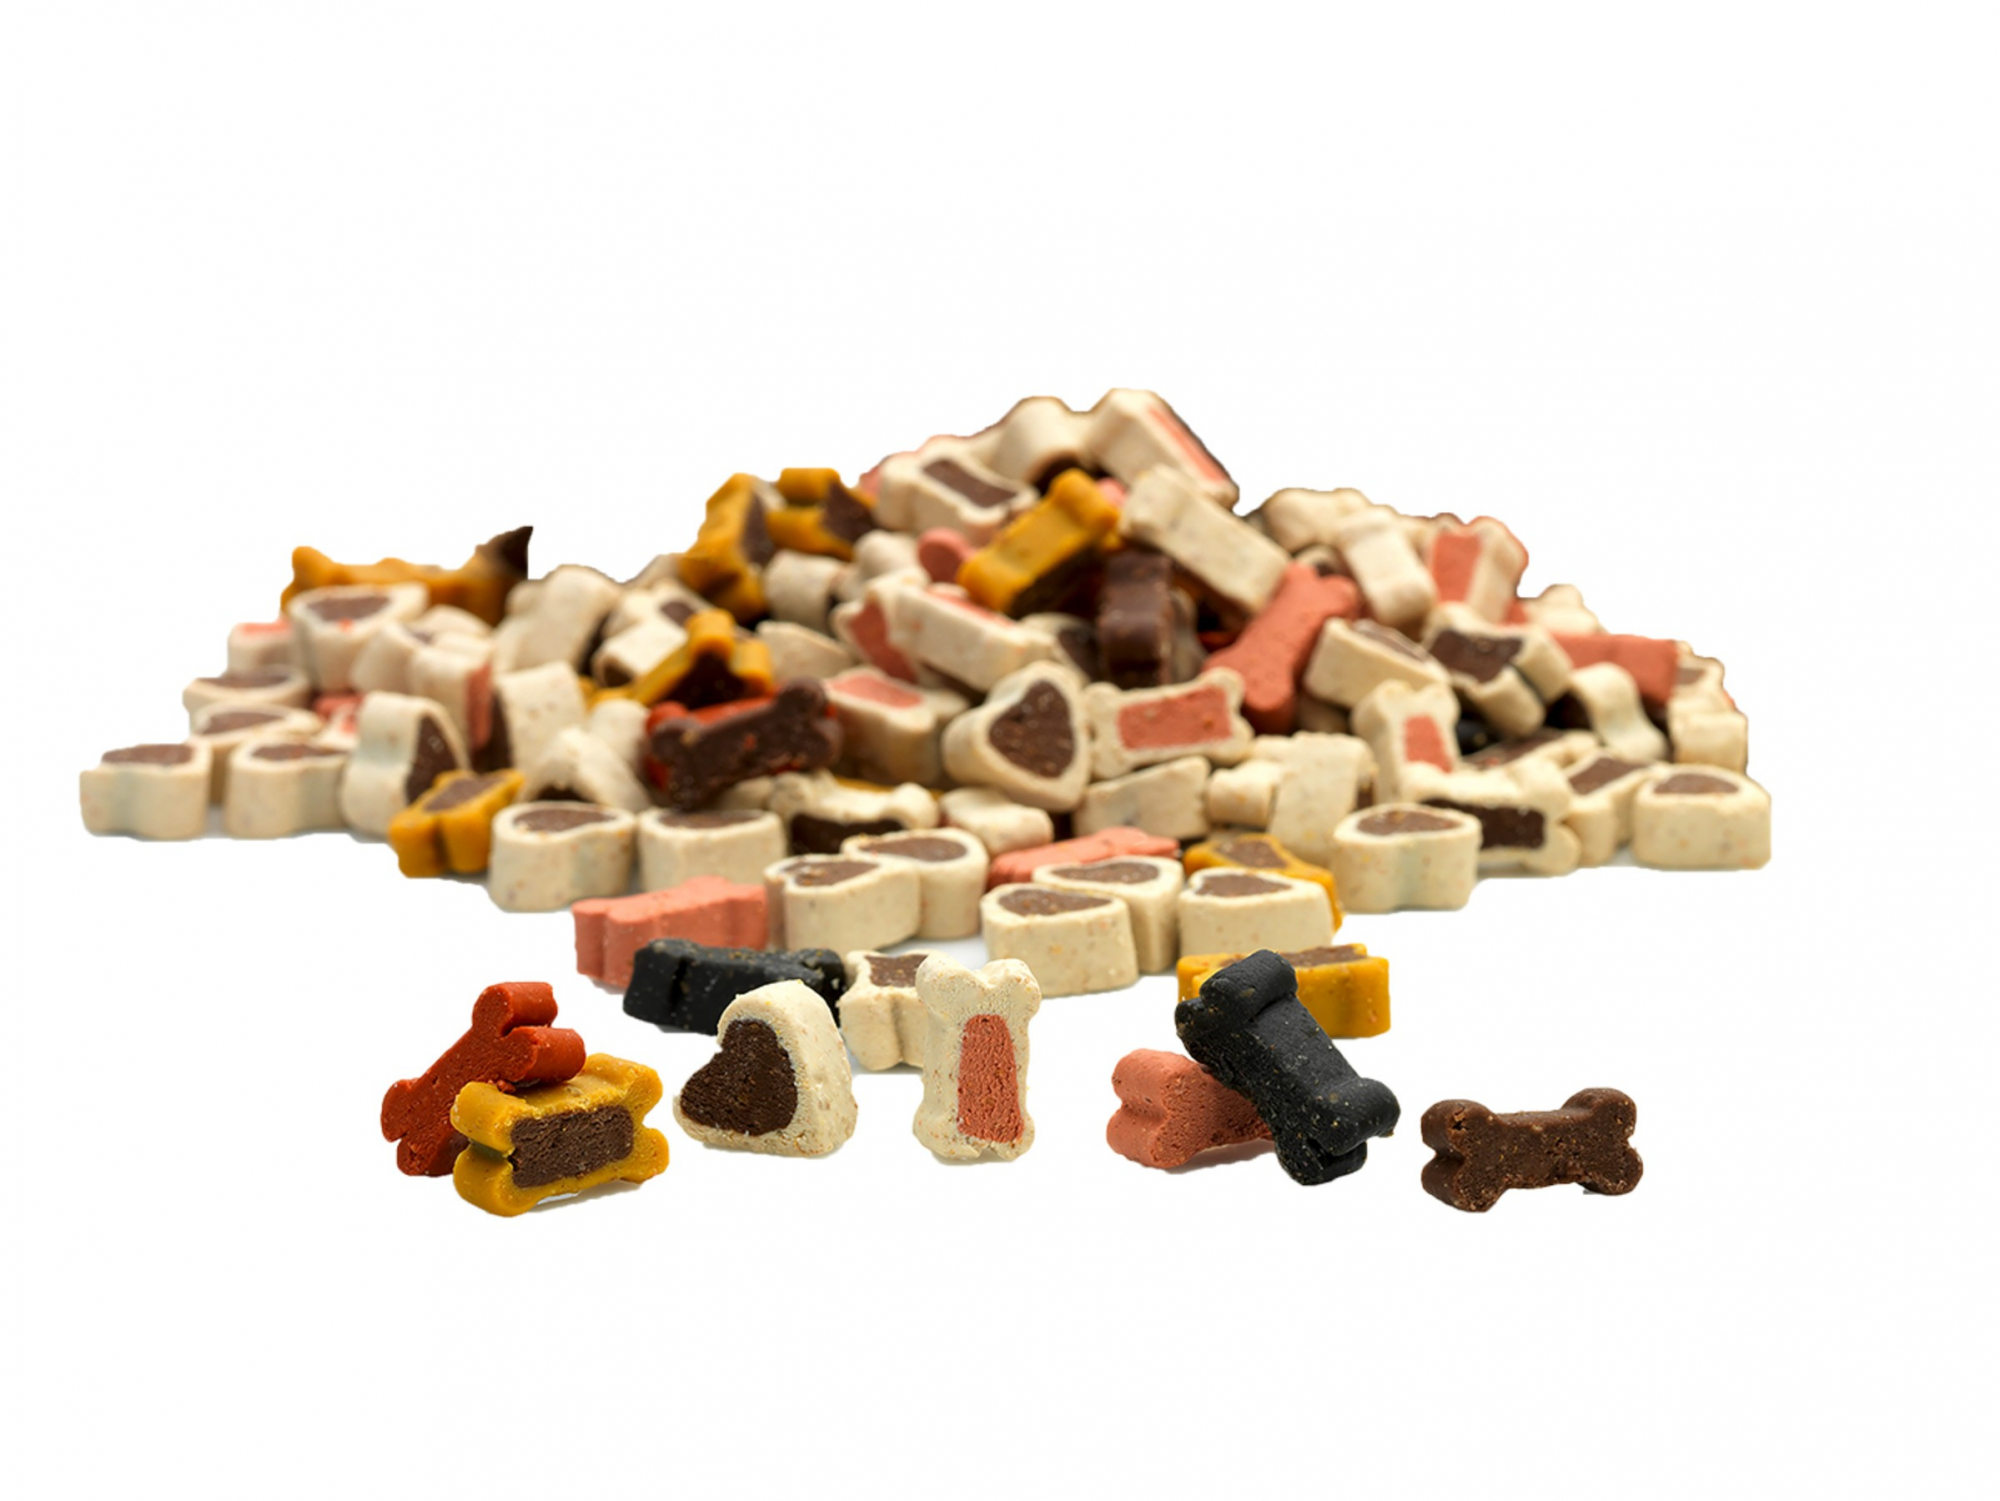 Party Mix Candy Snacks